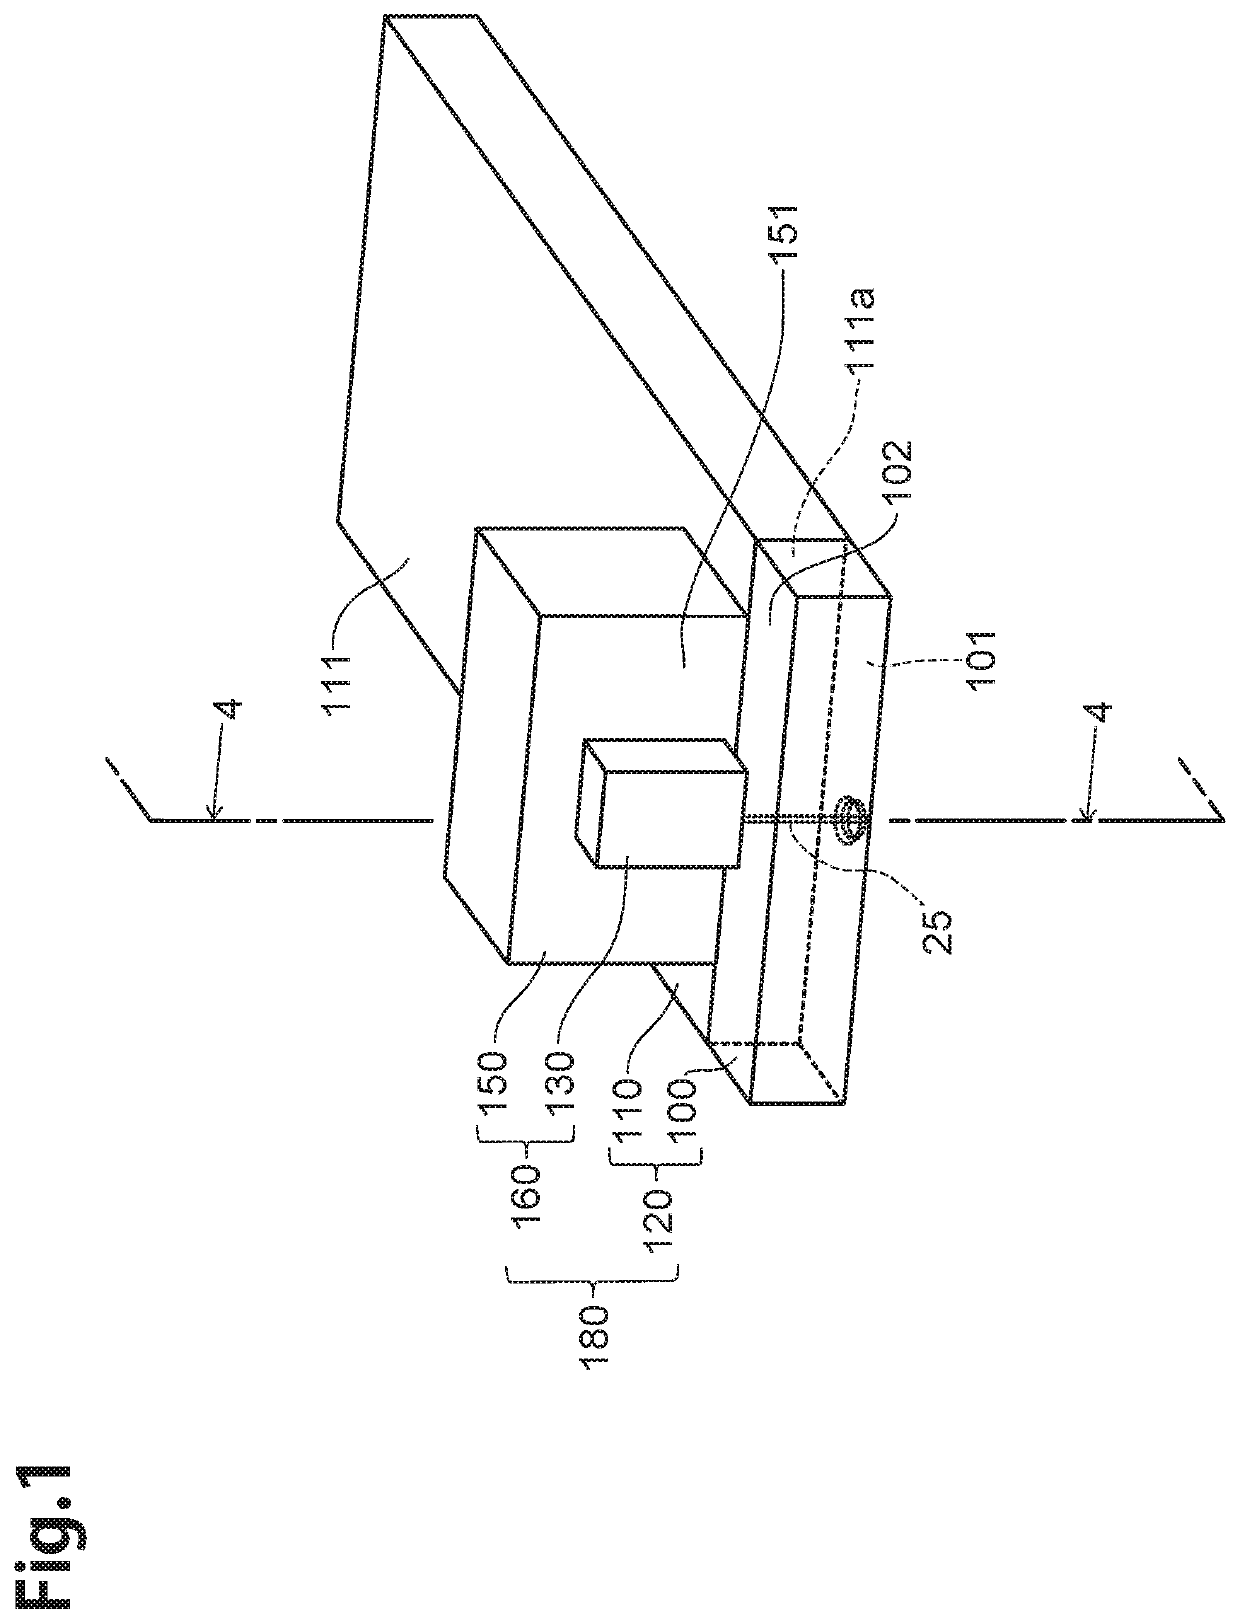 Thermally-assisted magnetic recording head having optimal reflecting position inside waveguide